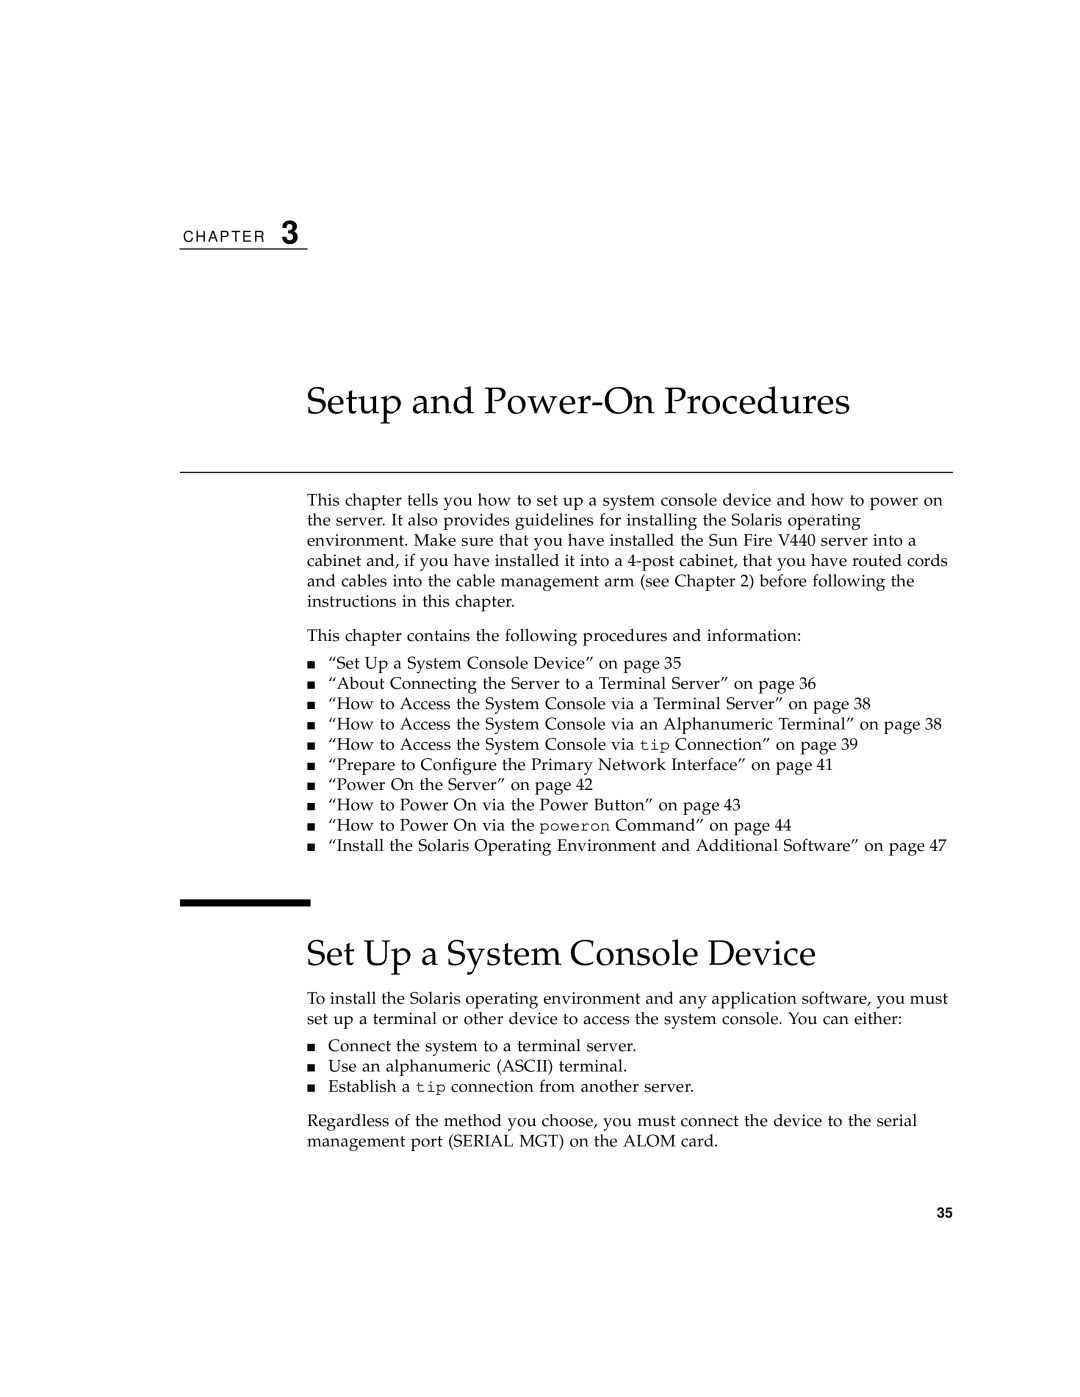 Sun Microsystems 816-7727-10 manual Setup and Power-On Procedures, Set Up a System Console Device 